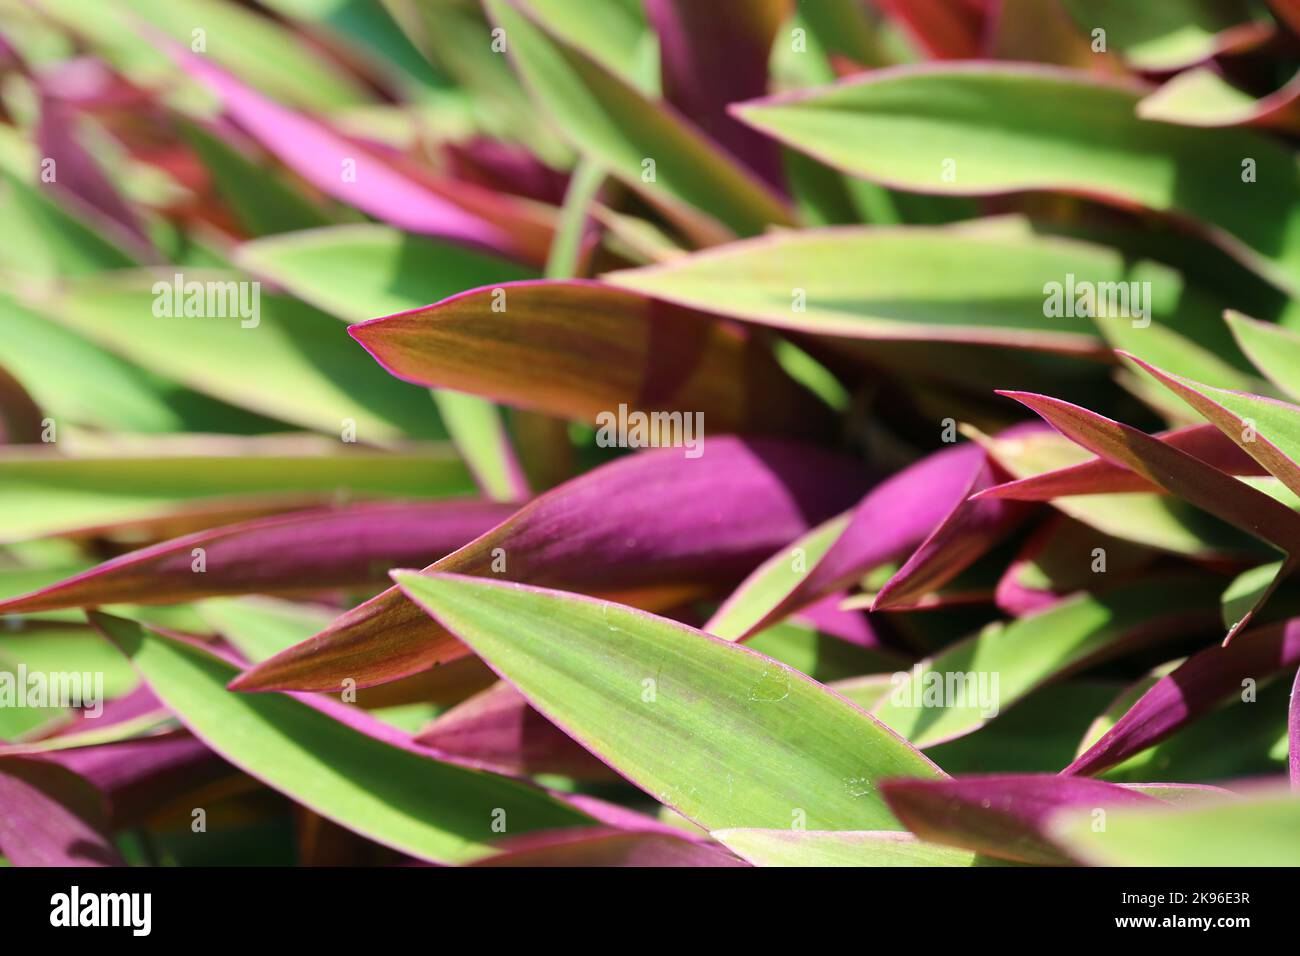 Amazing Green with Purple Leaves of Boat Lily or Oyster Plants in the Sunlight Stock Photo